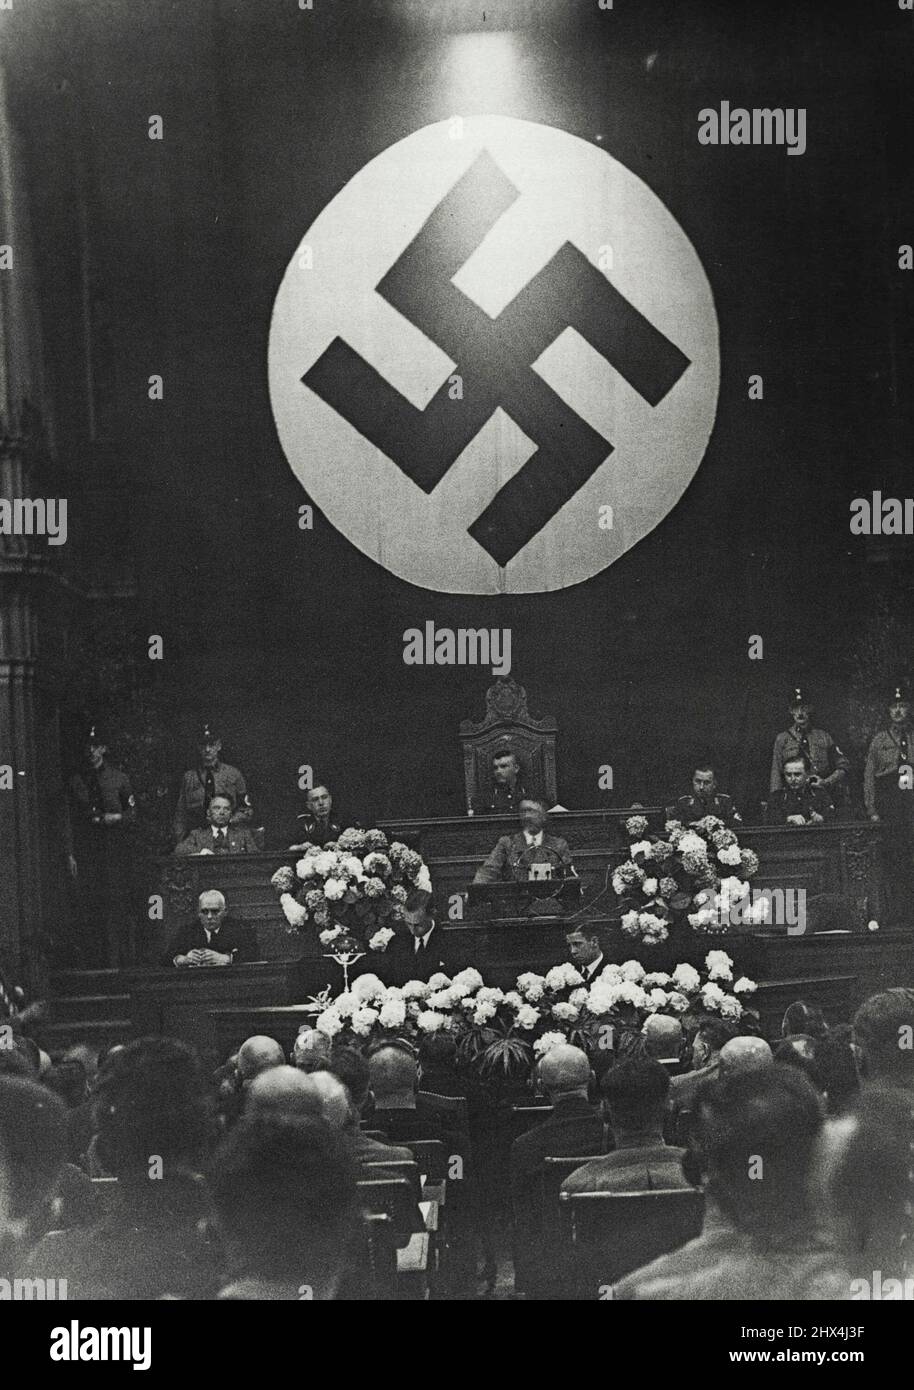 Workers congress in Berlin -- In the Chamber of the State Council in Berlin the first major conference of the German labor front was rigid. Deligation Reichskanzler Adolf Hitler ***** speech to the workers. July 17, 1933. Stock Photo